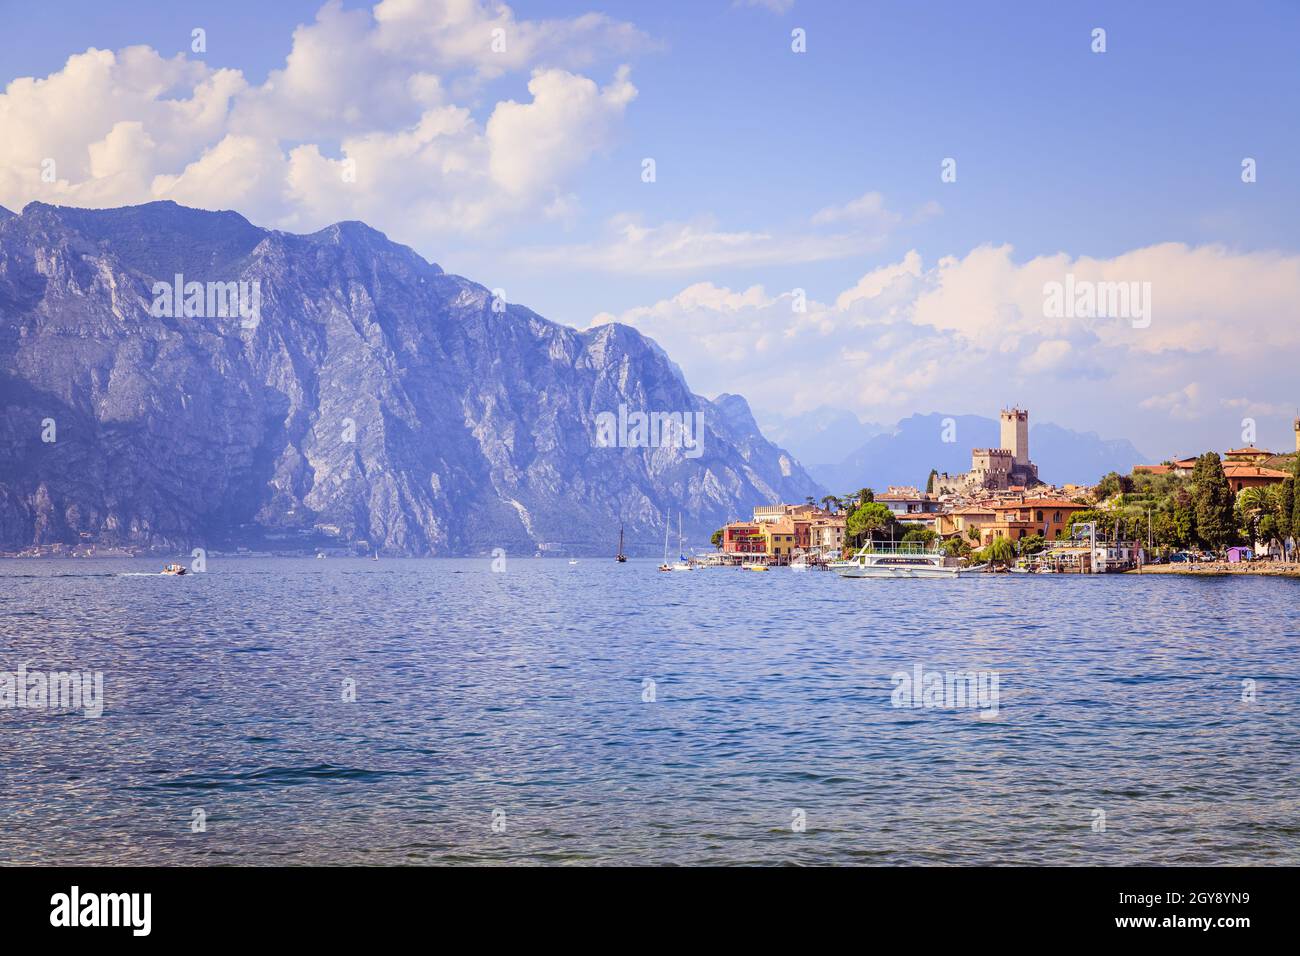 Idyllic italian coastline with water, a cute little village, mountains and the sky Stock Photo